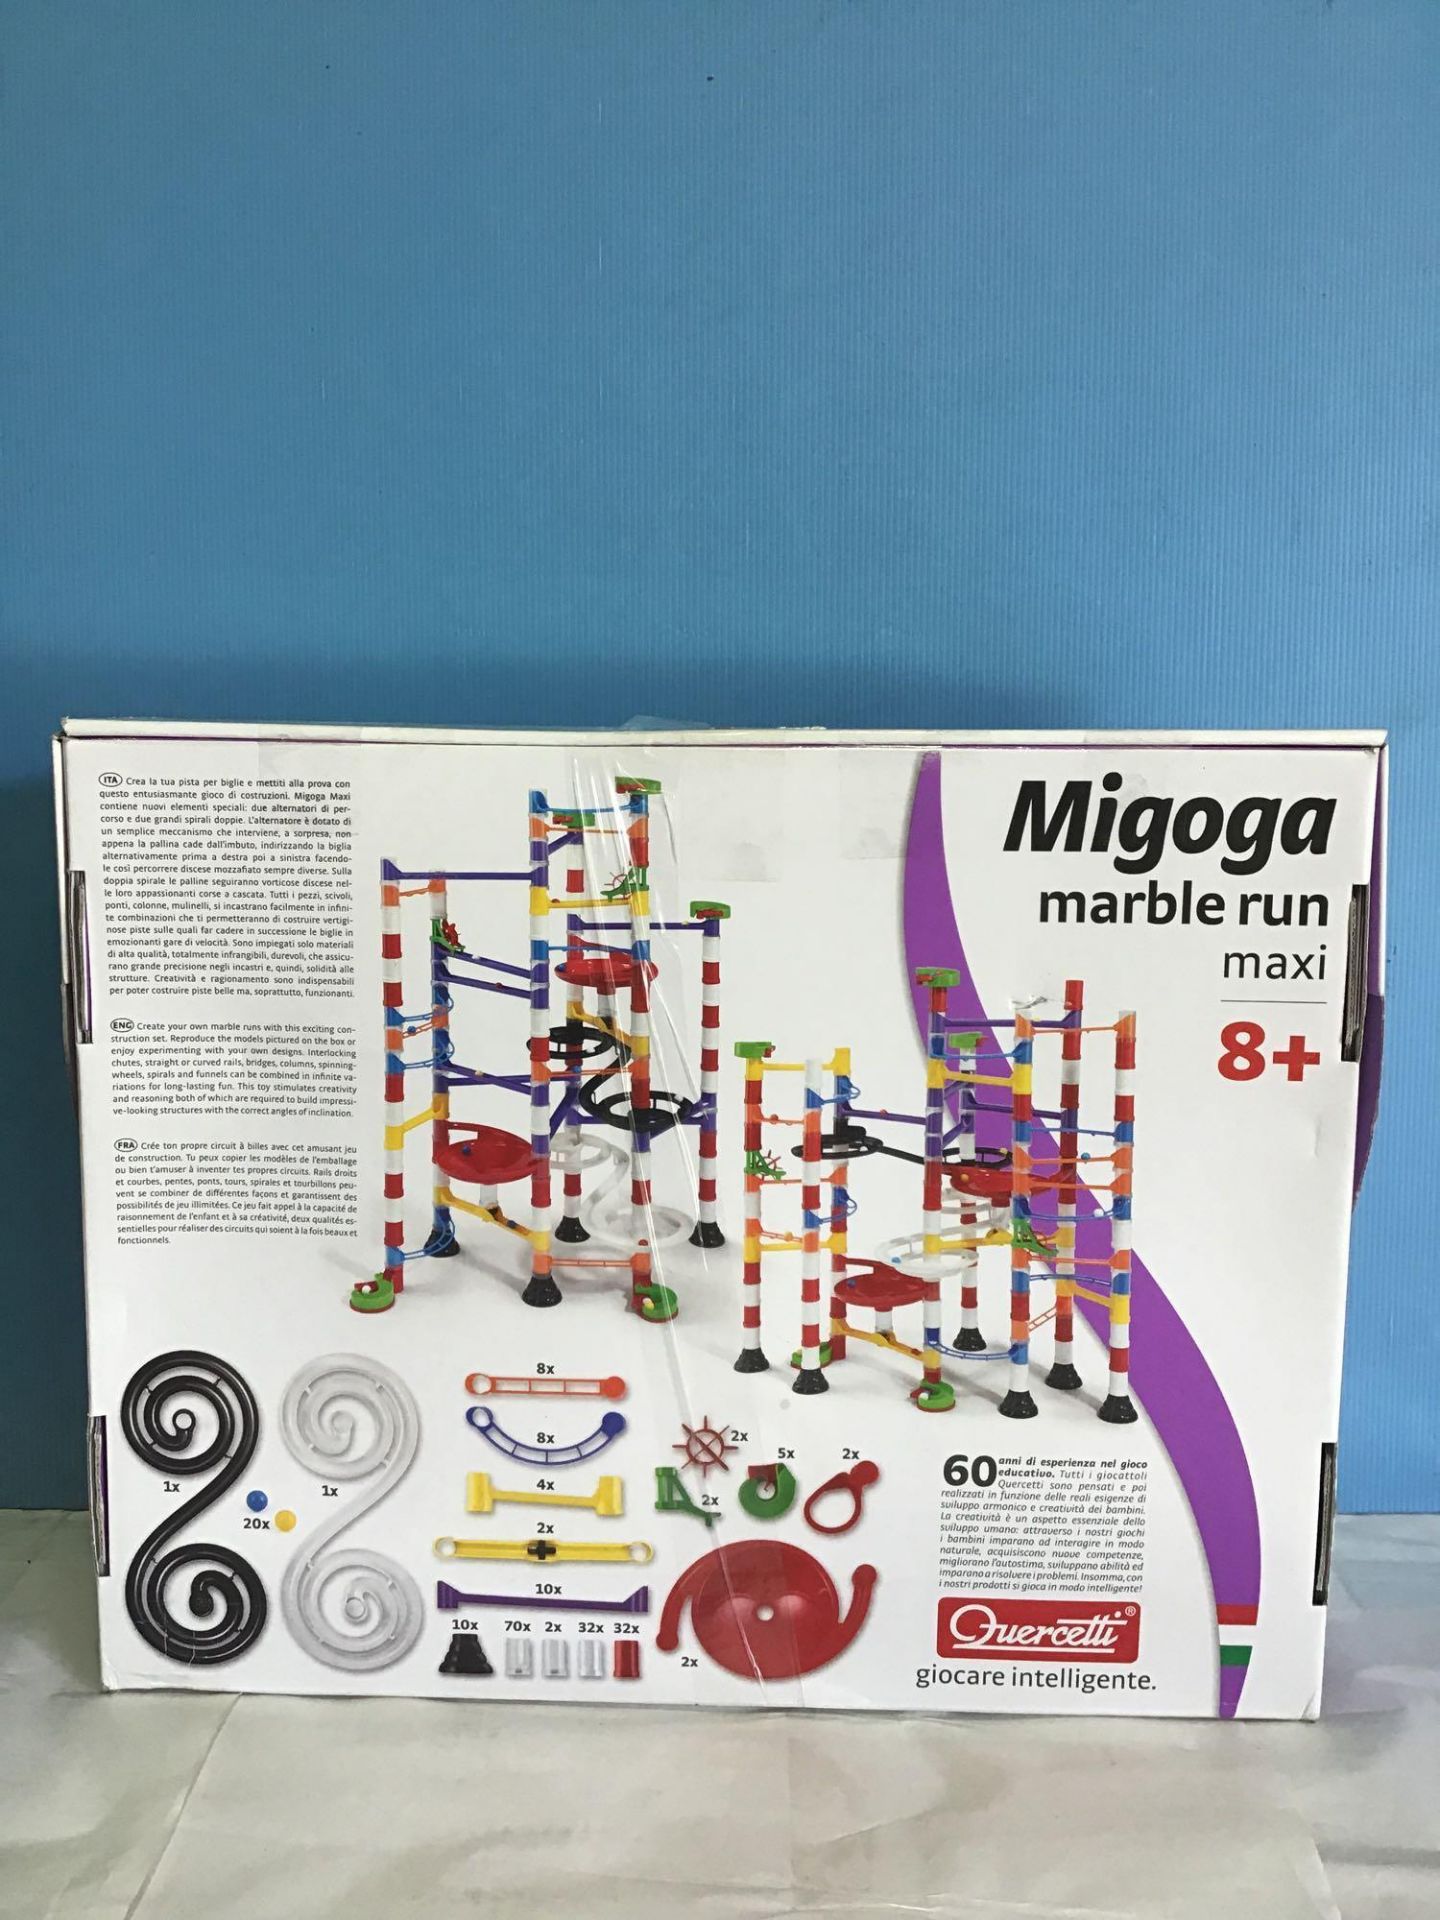 Quercetti-6588 Migoga Maxi Marble Runs STEM Educational Learning Toy, 8 Years - Image 3 of 5